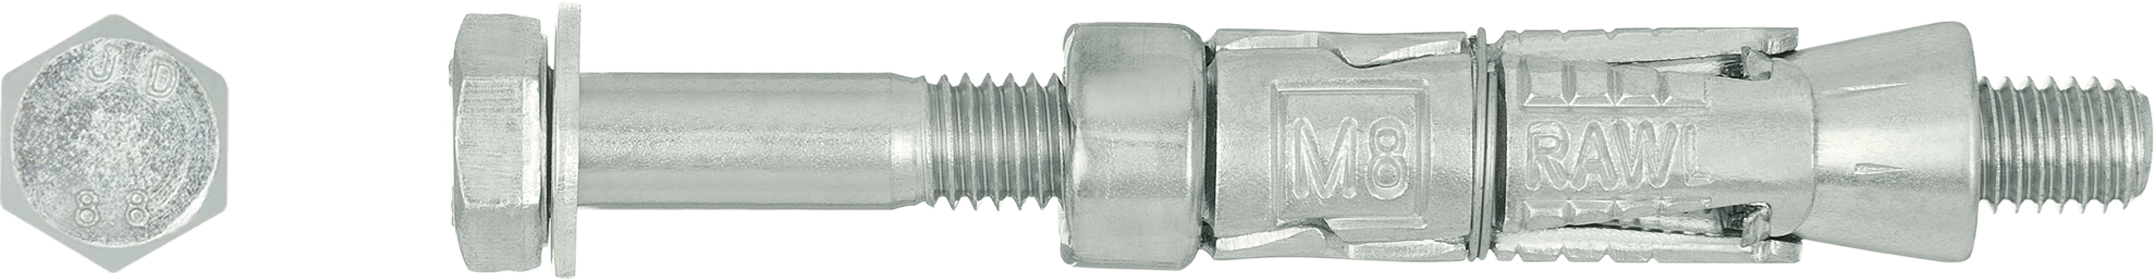 R-RBL Rawlbolt® - Loose Bolt for use in hollow core slab and ceramic substrates